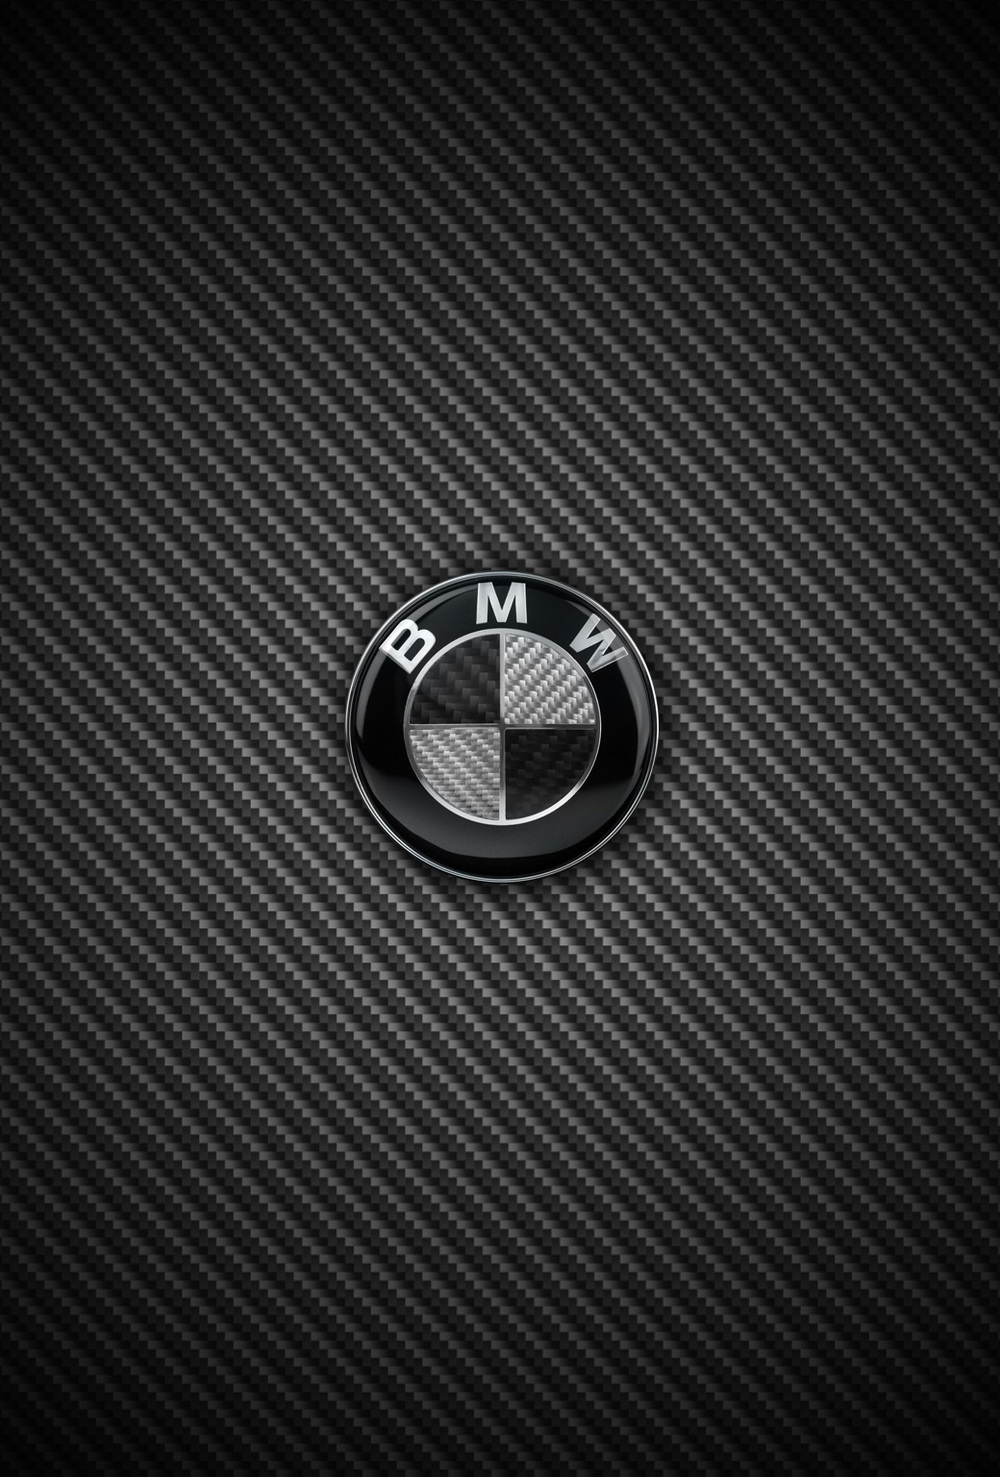 Carbon Fiber Bmw And M Power iPhone Wallpaper For Ios Parallax